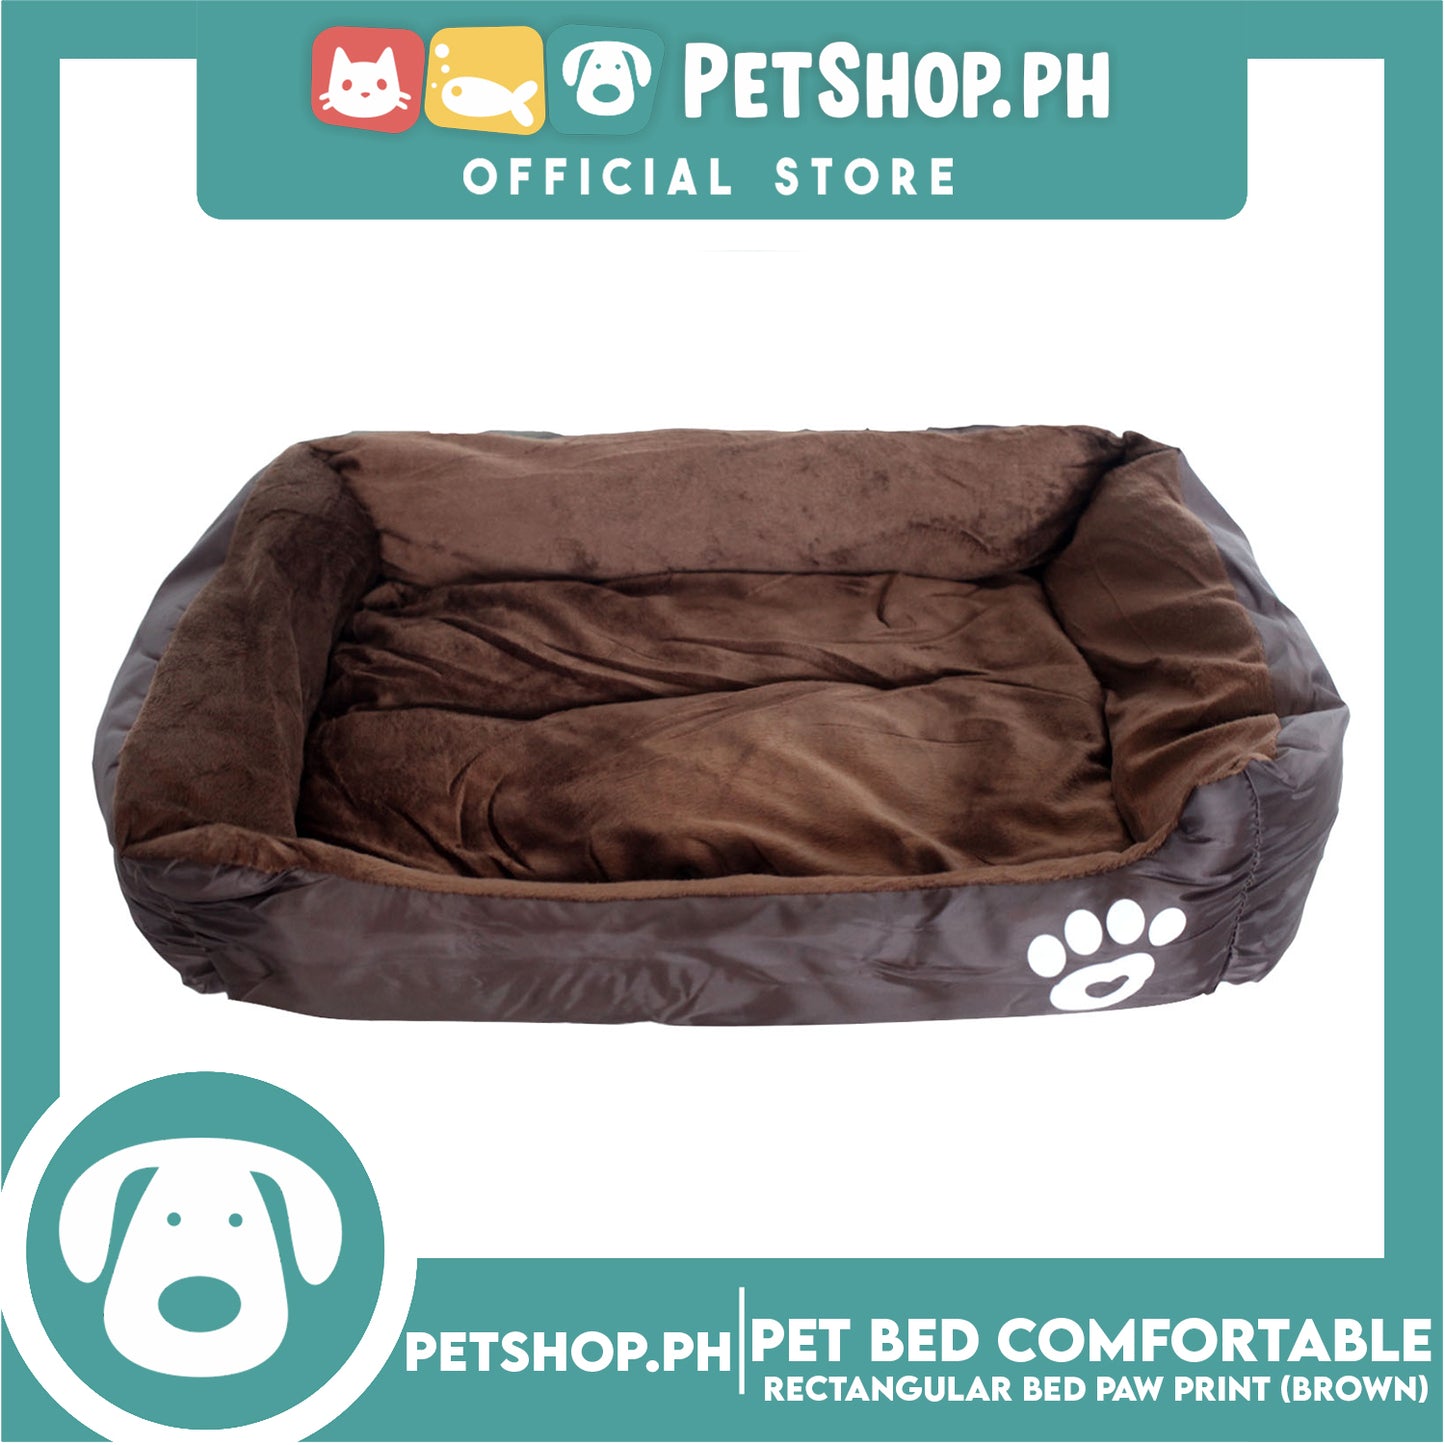 Pet Bed Comfortable Rectangular Pet Bed with Paw Print 72x58x10cm Large for Dogs & Cats (Brown)